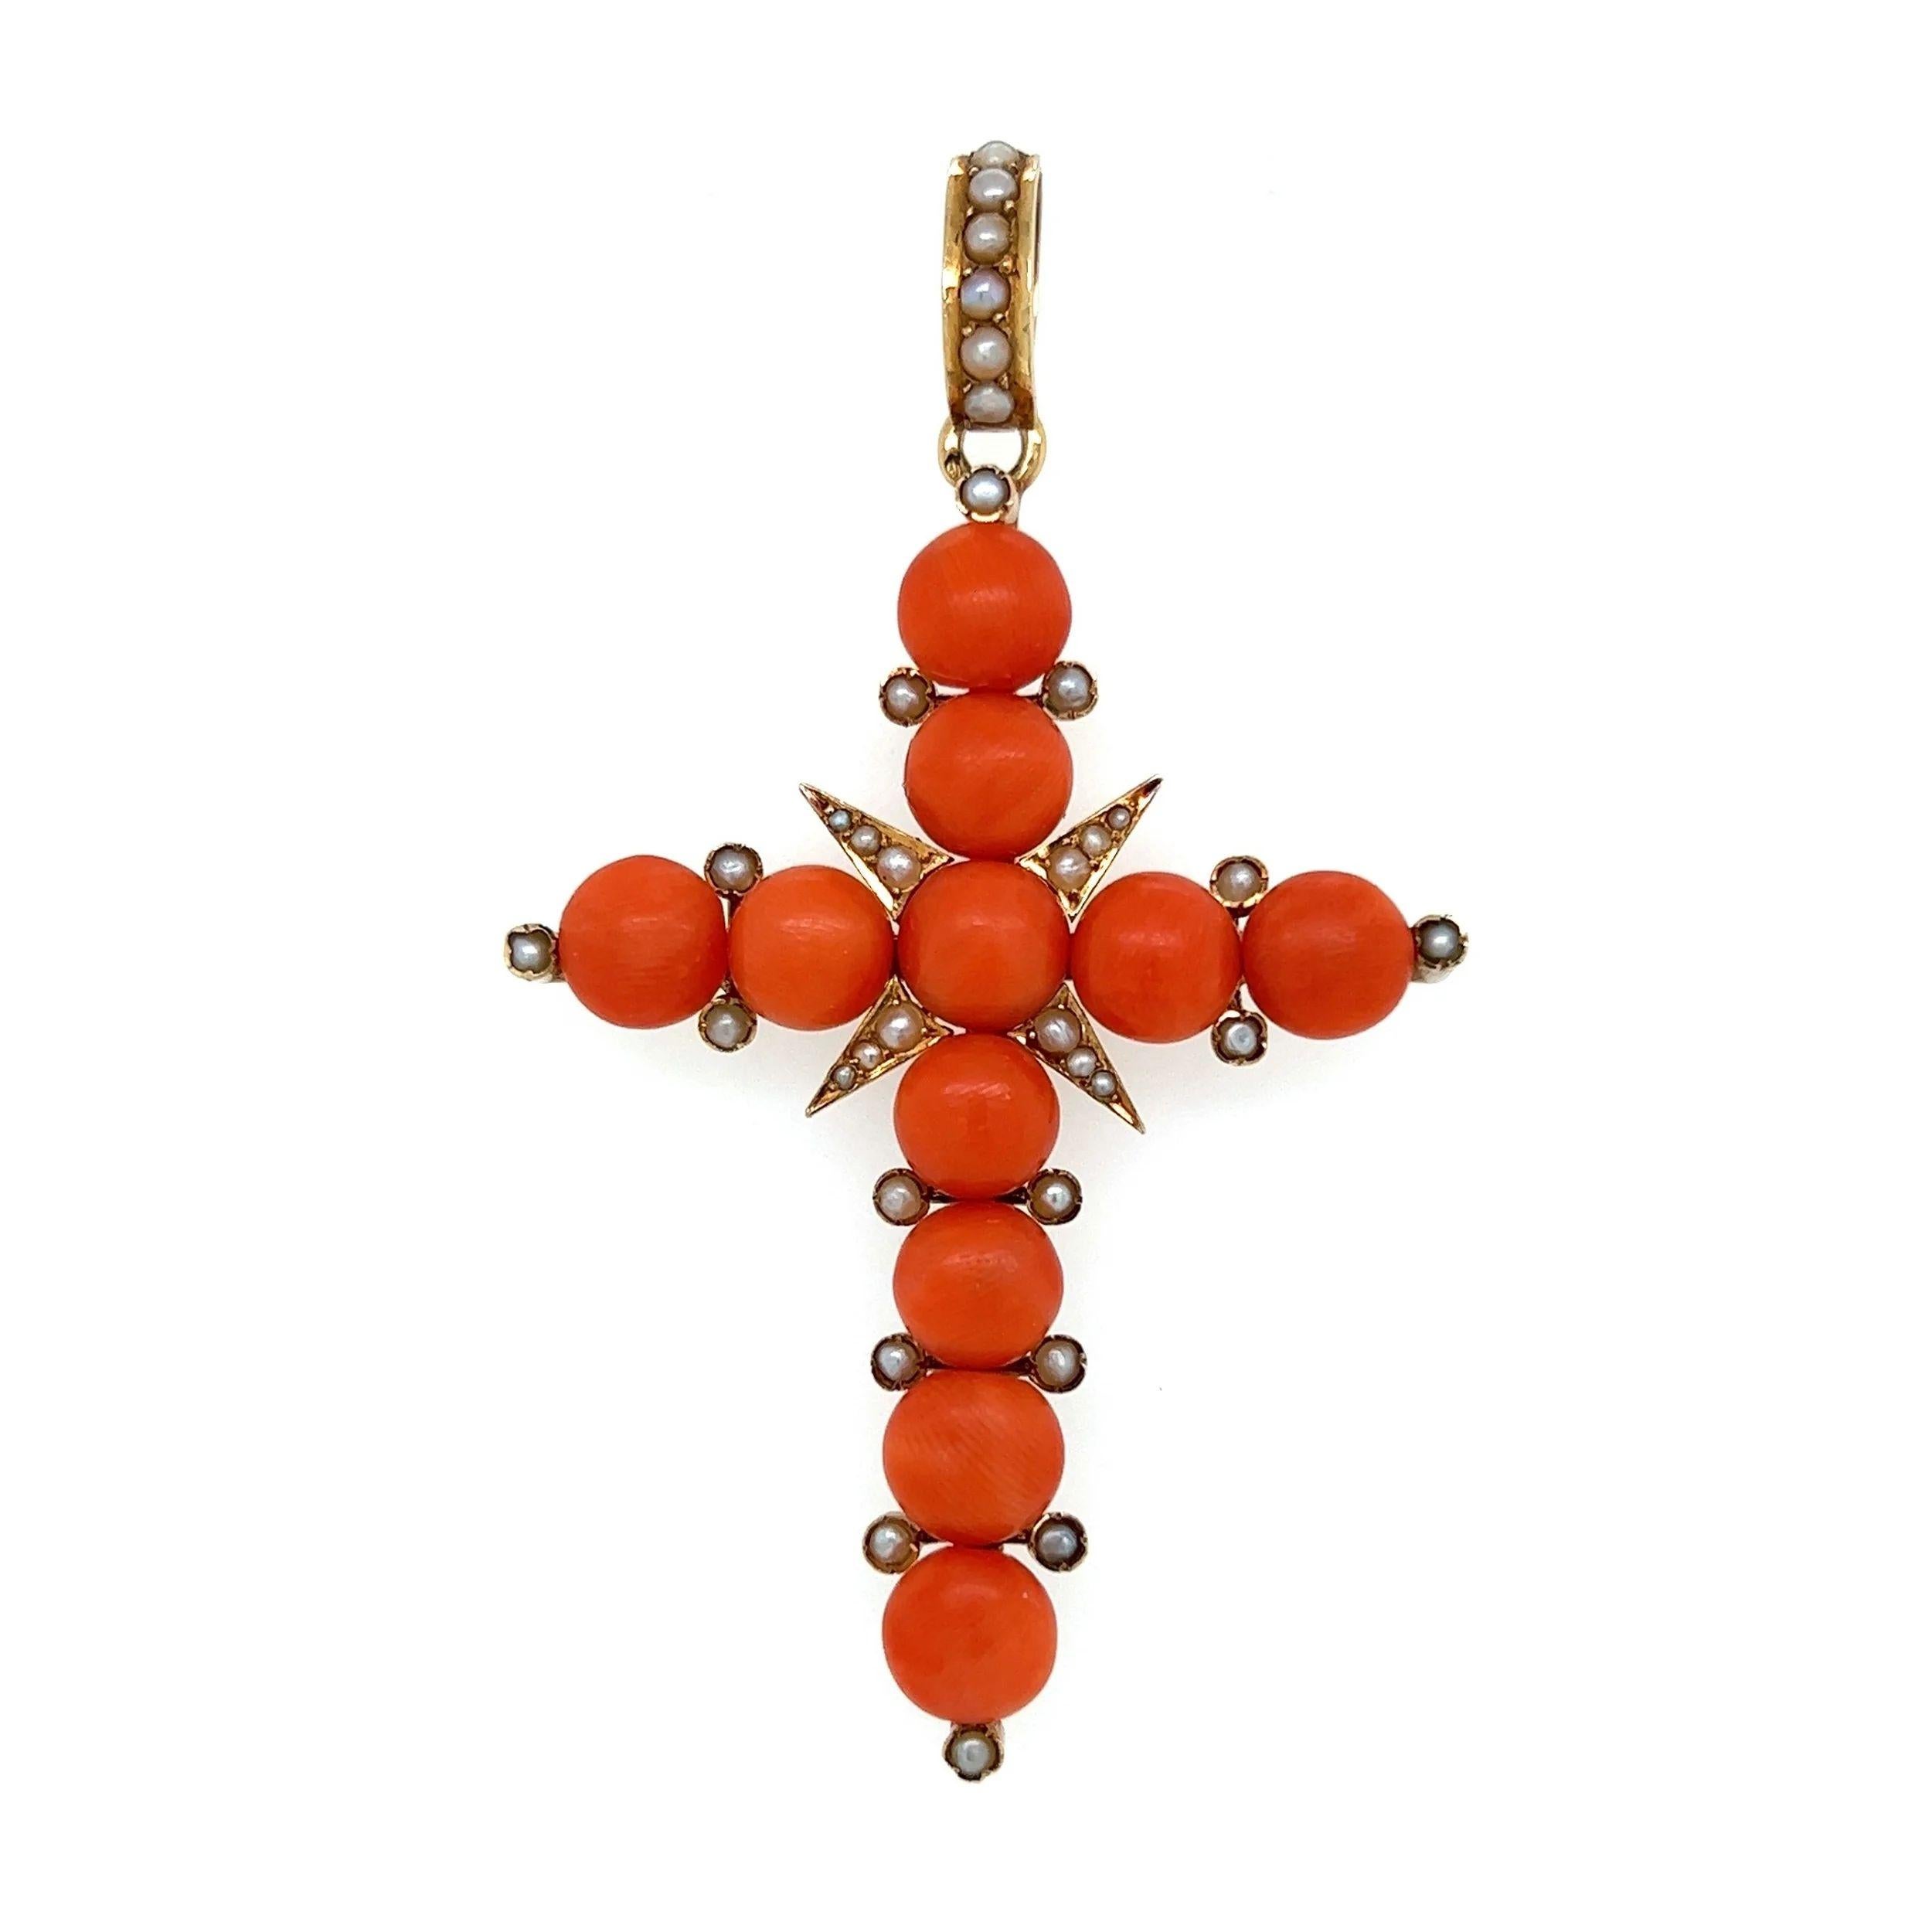 Simply Beautiful! Red Coral and Seed Pearl Victorian French Cross Pendant. Securely Hand set with 11 Deep Red Coral, accented by Seed Pearls. Beautifully mounted in Hand crafted 18K Yellow Gold. Cross measures approx. 2.70” l x 1.60” w x 0.31” h.